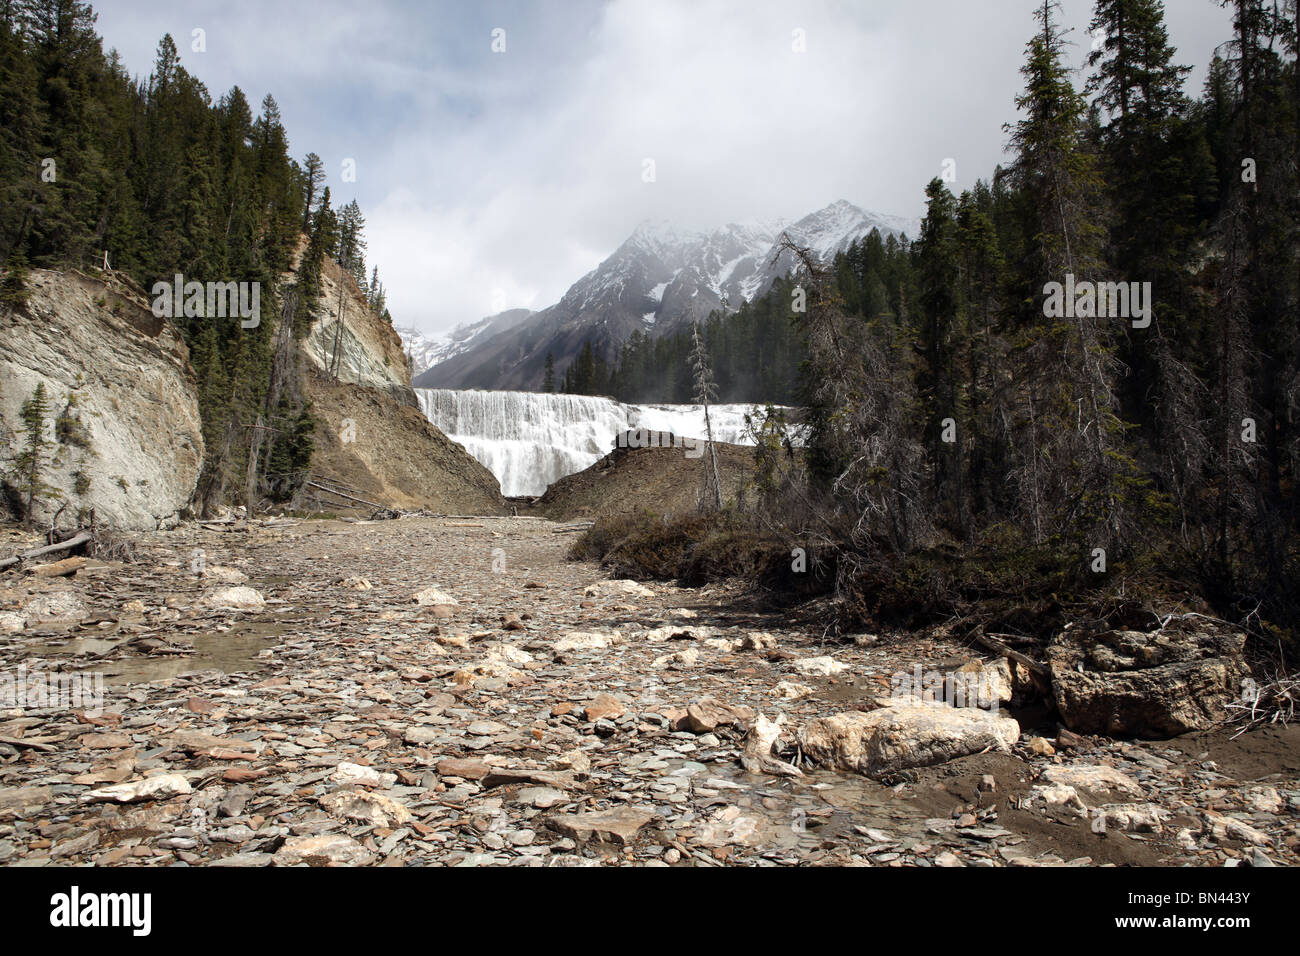 View of the Wapta Falls - Largest waterfall of the Kicking Horse River -Yoho National Park - British Columbia - Canada Stock Photo